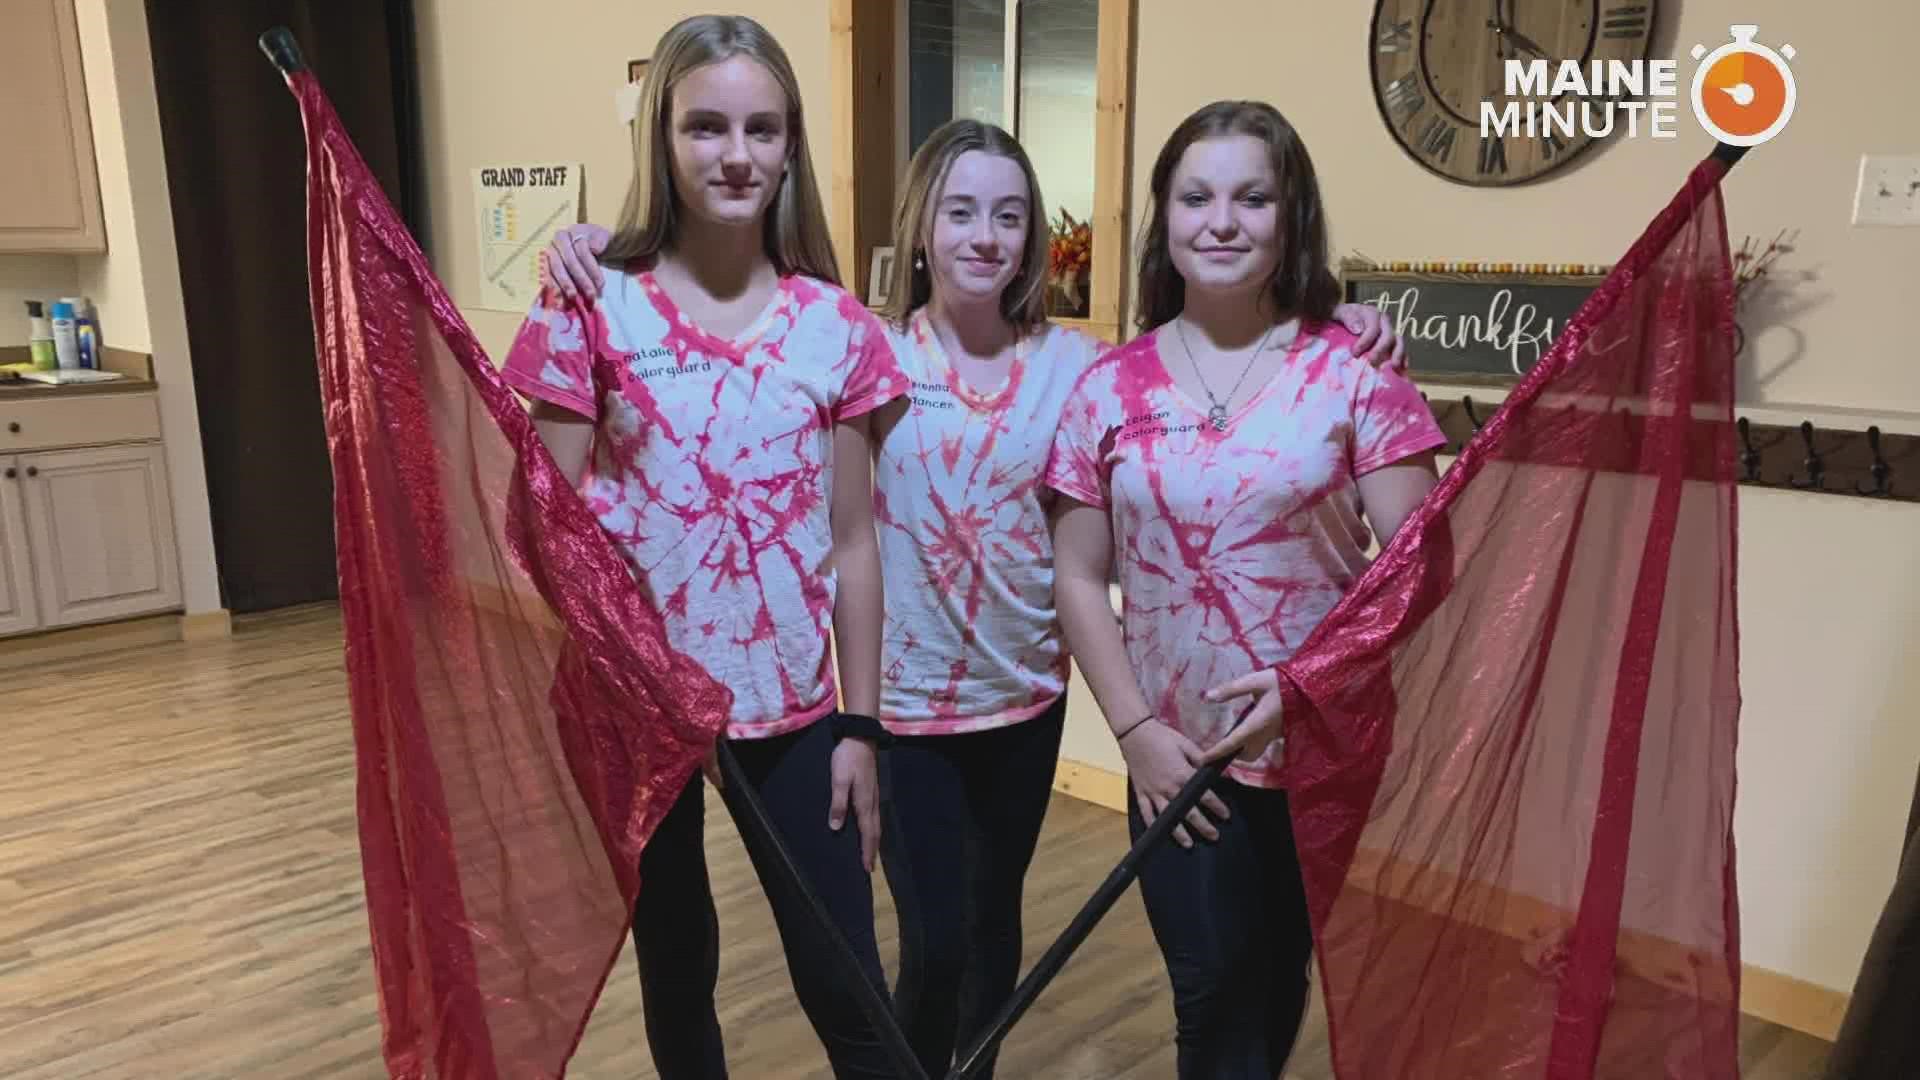 Two girls from Wells High School will be color guards for the Macy's Thanksgiving Day Parade. Another girl from R.W. Traip Academy in Kittery will be a dancer.